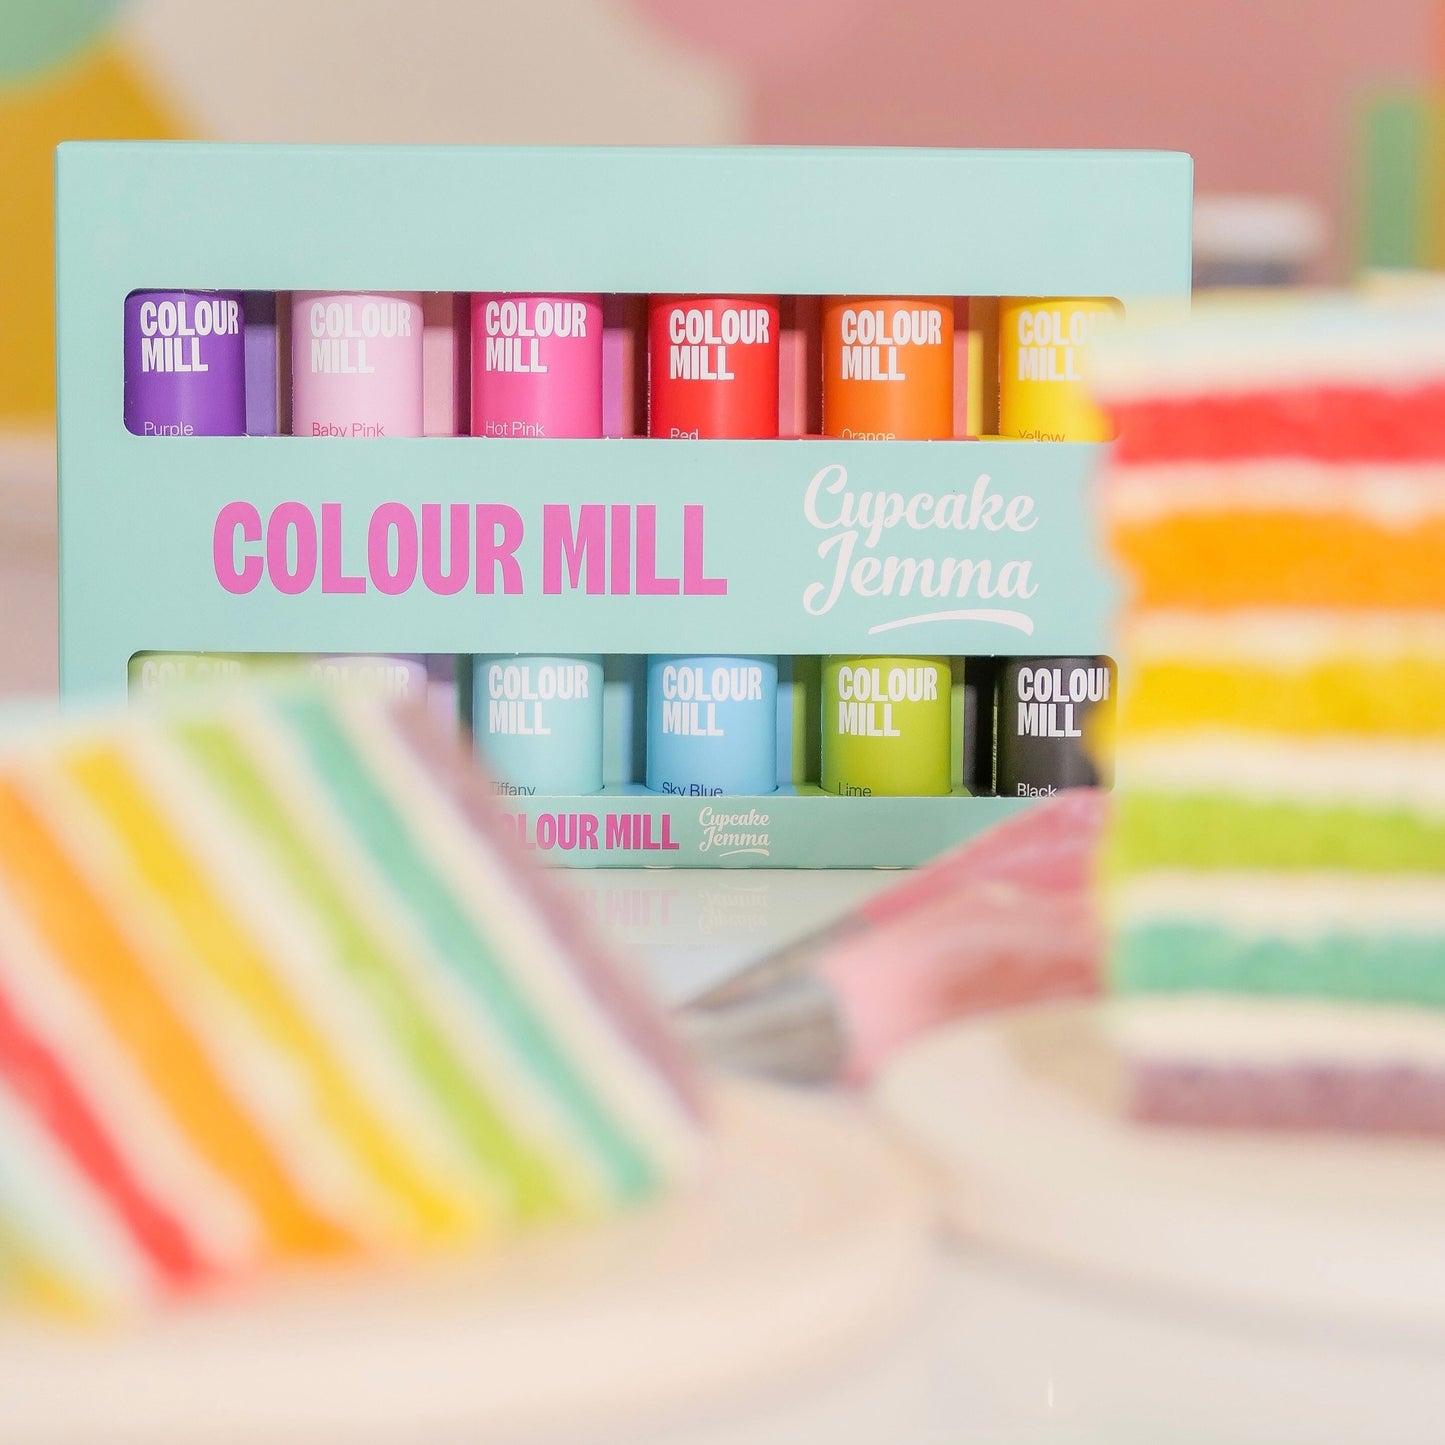 Colour Mill  Cupcake Jemma x Colour Mill Pack